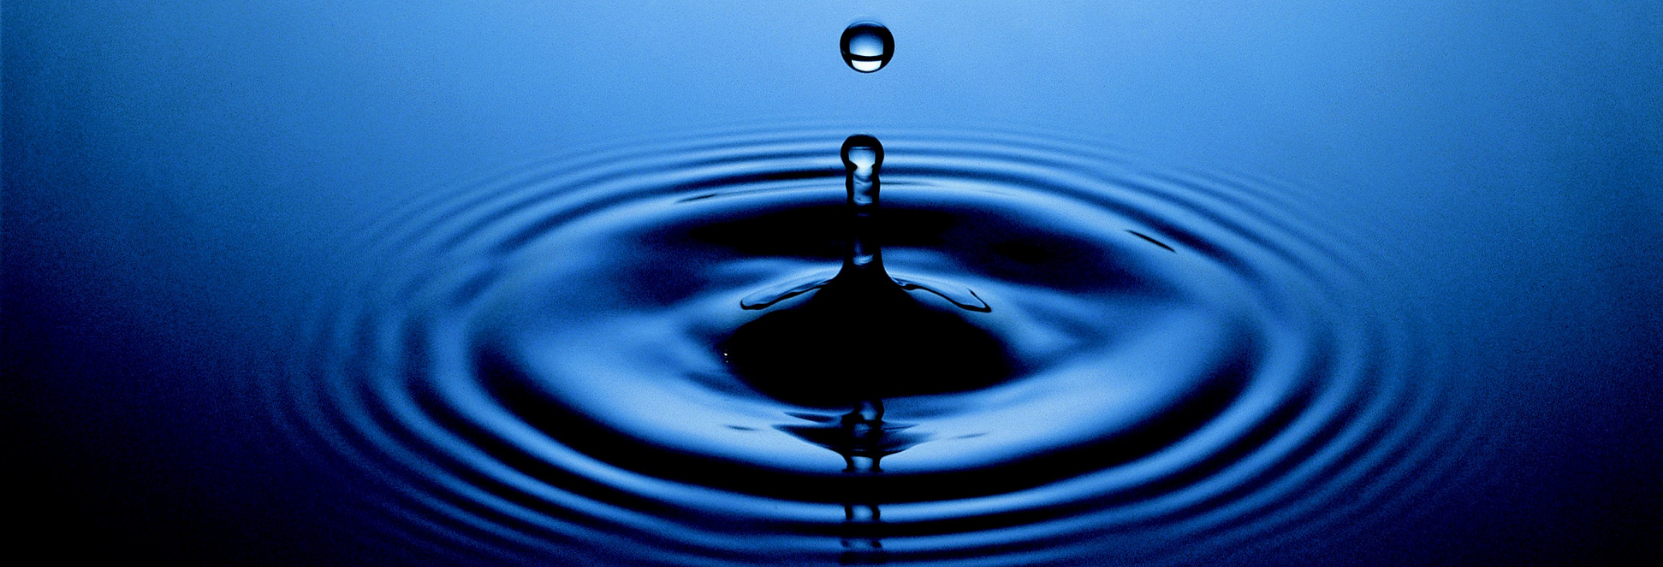 Water drop showing the ripple effect.